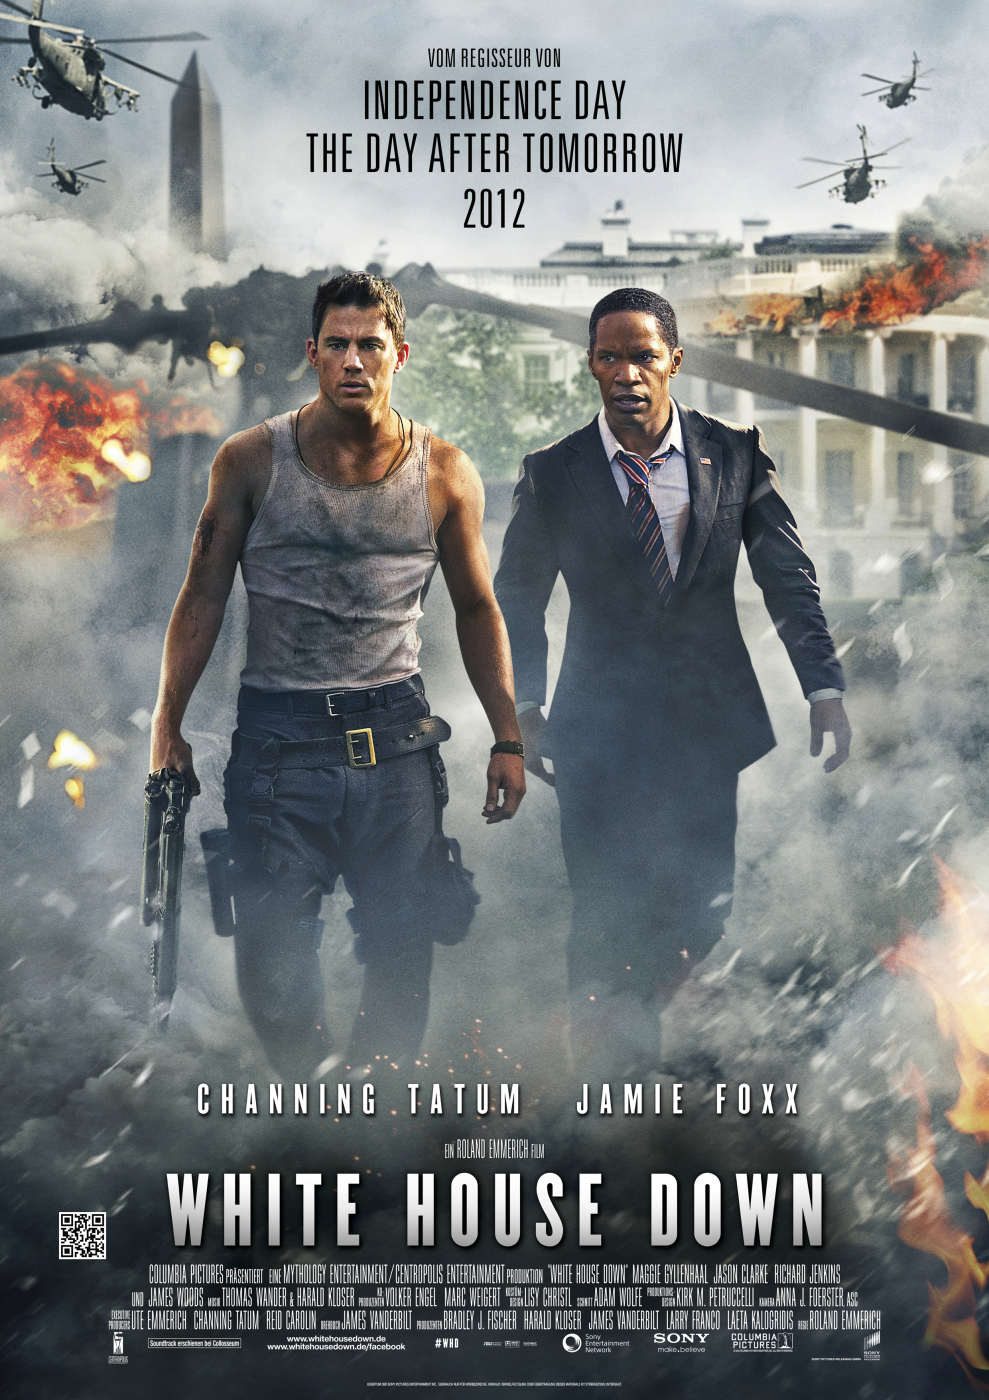 who played in white house down